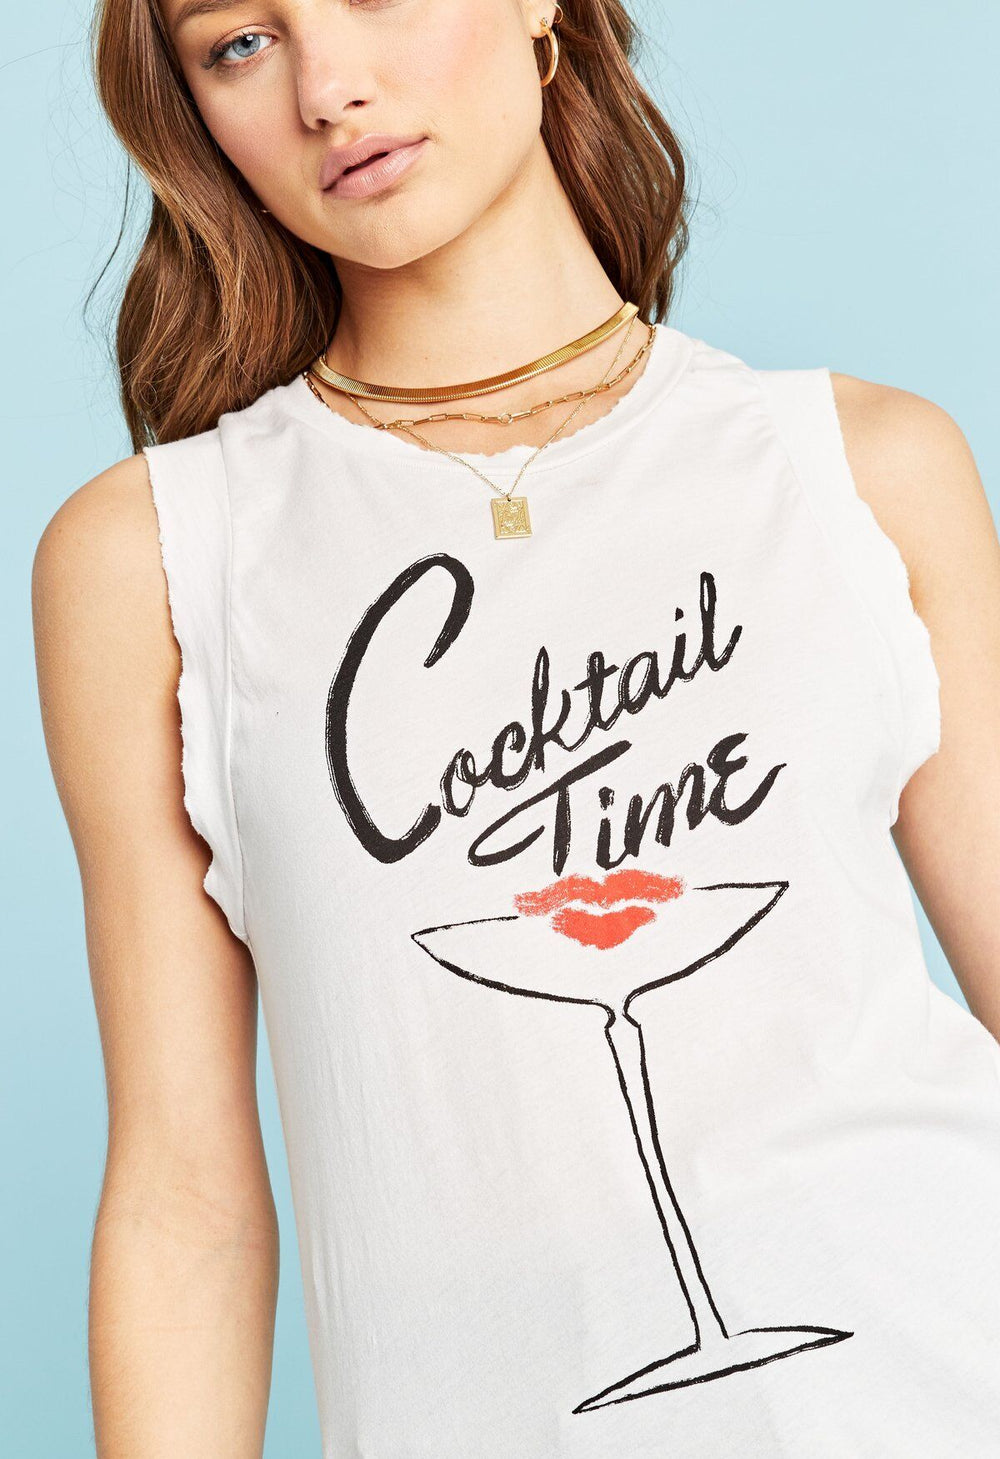 COCKTAIL TIME TANK - Kingfisher Road - Online Boutique